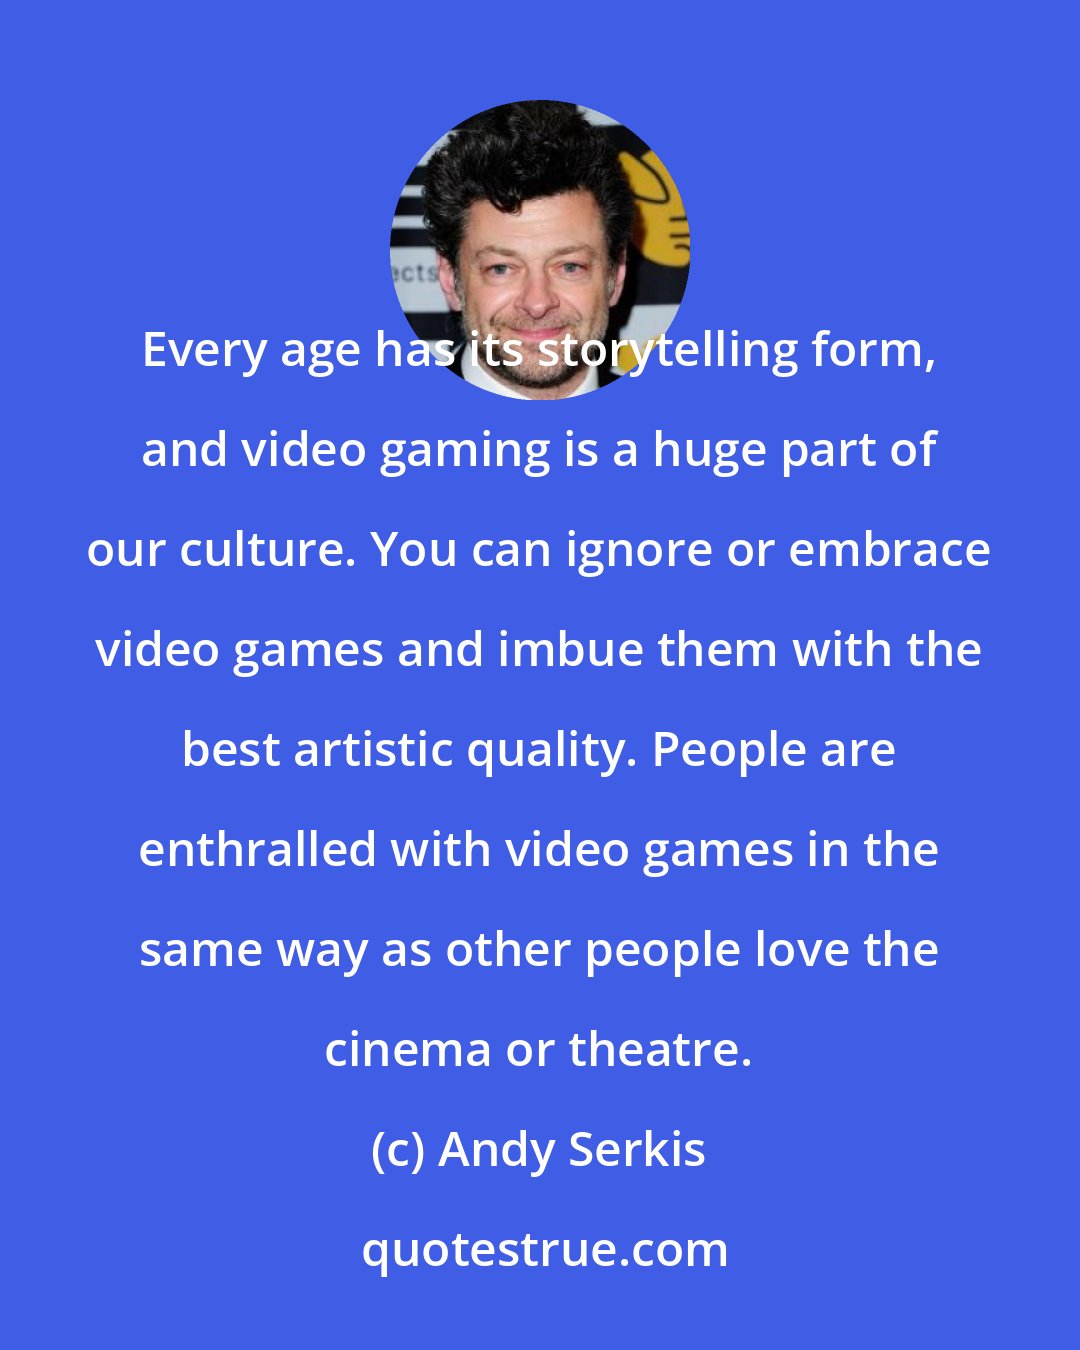 Andy Serkis: Every age has its storytelling form, and video gaming is a huge part of our culture. You can ignore or embrace video games and imbue them with the best artistic quality. People are enthralled with video games in the same way as other people love the cinema or theatre.